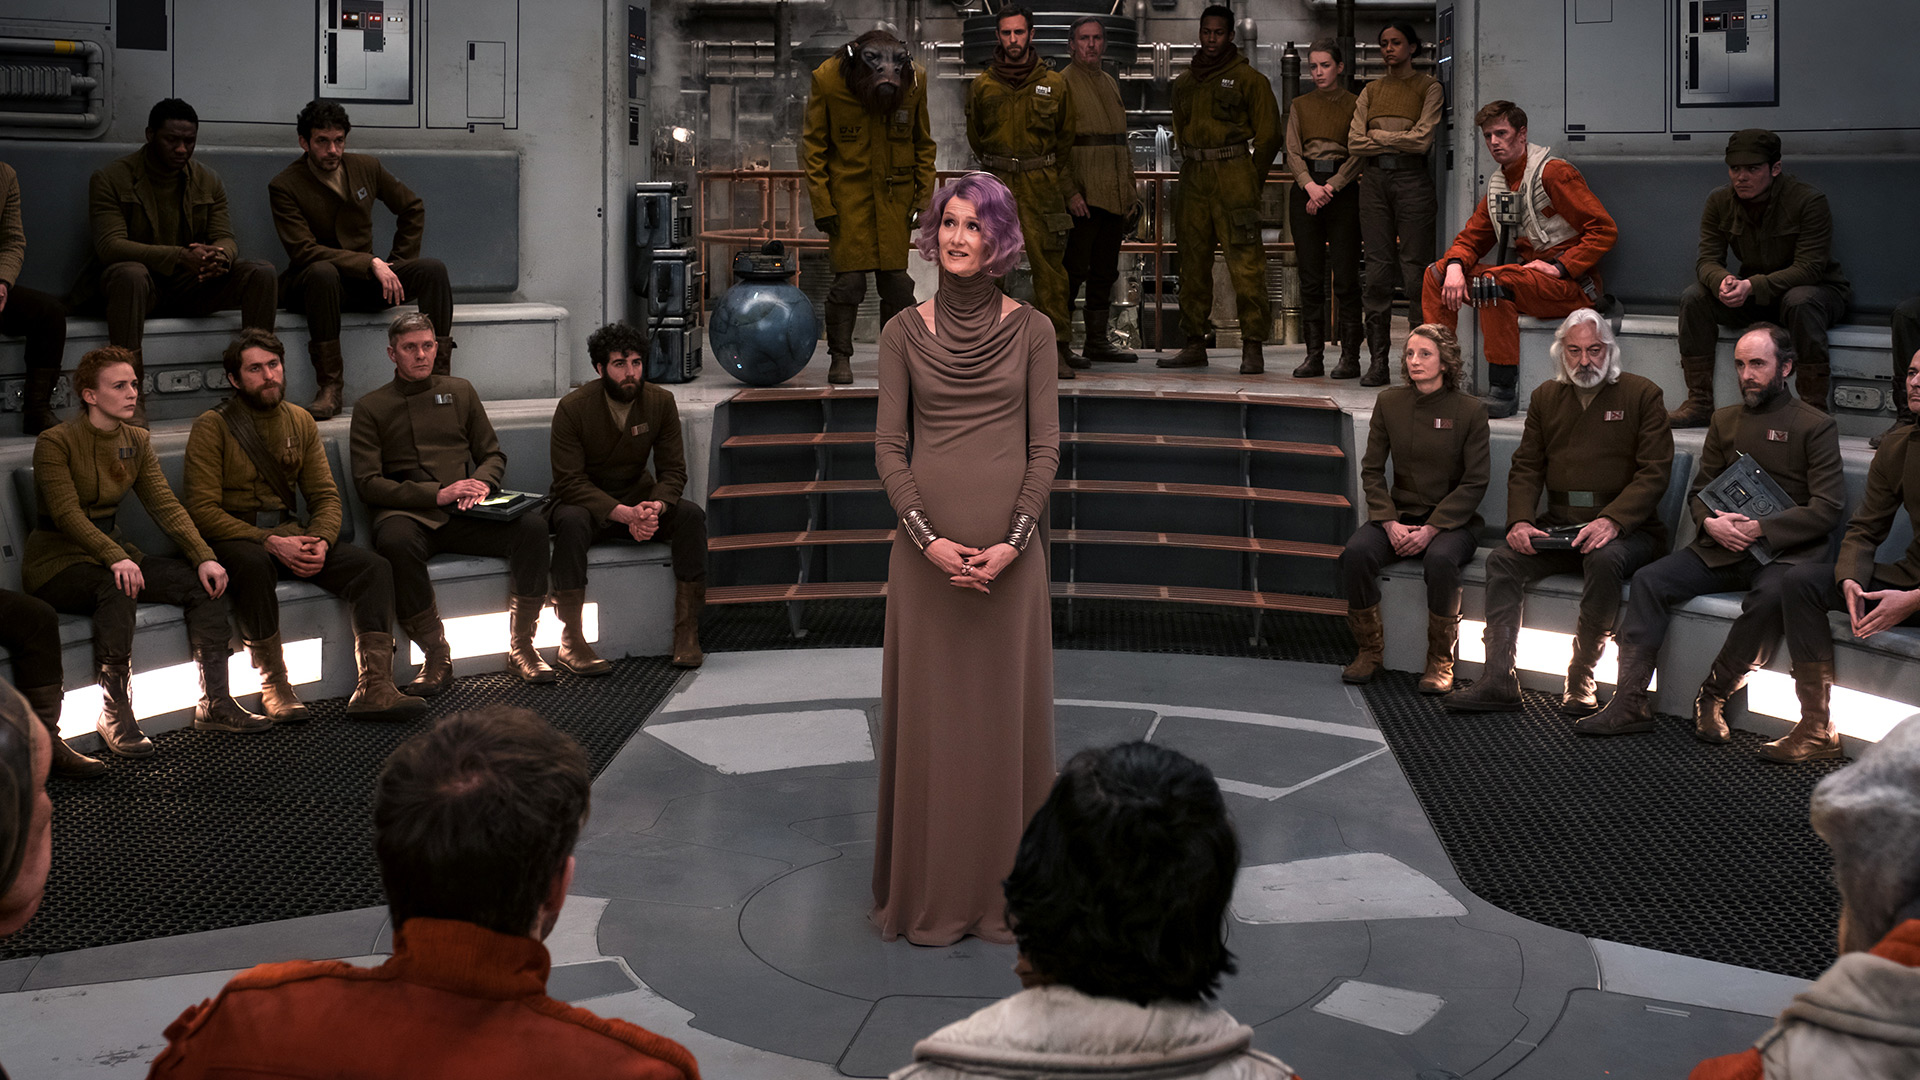 Admiral Holdo addresses the Resistance